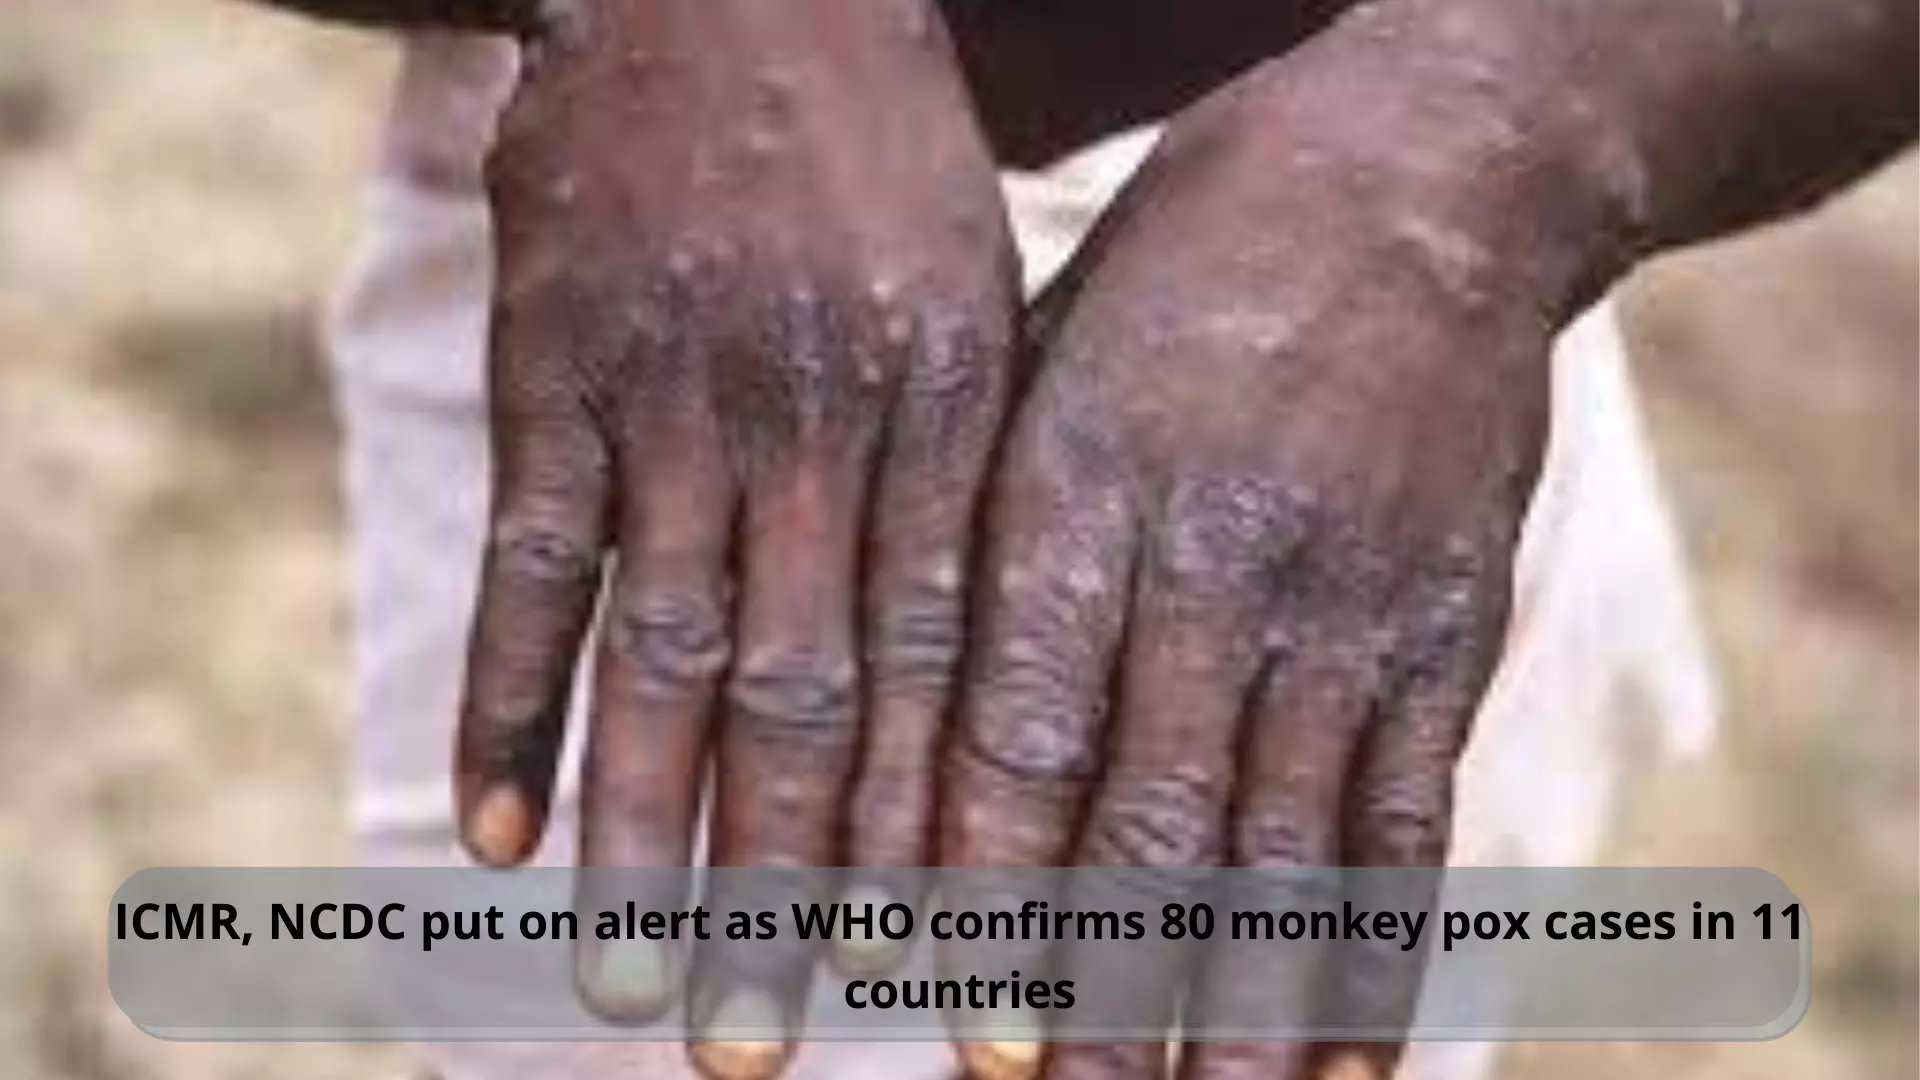 ICMR, NCDC put on alert as WHO confirms 80 monkey pox cases in 11 countries